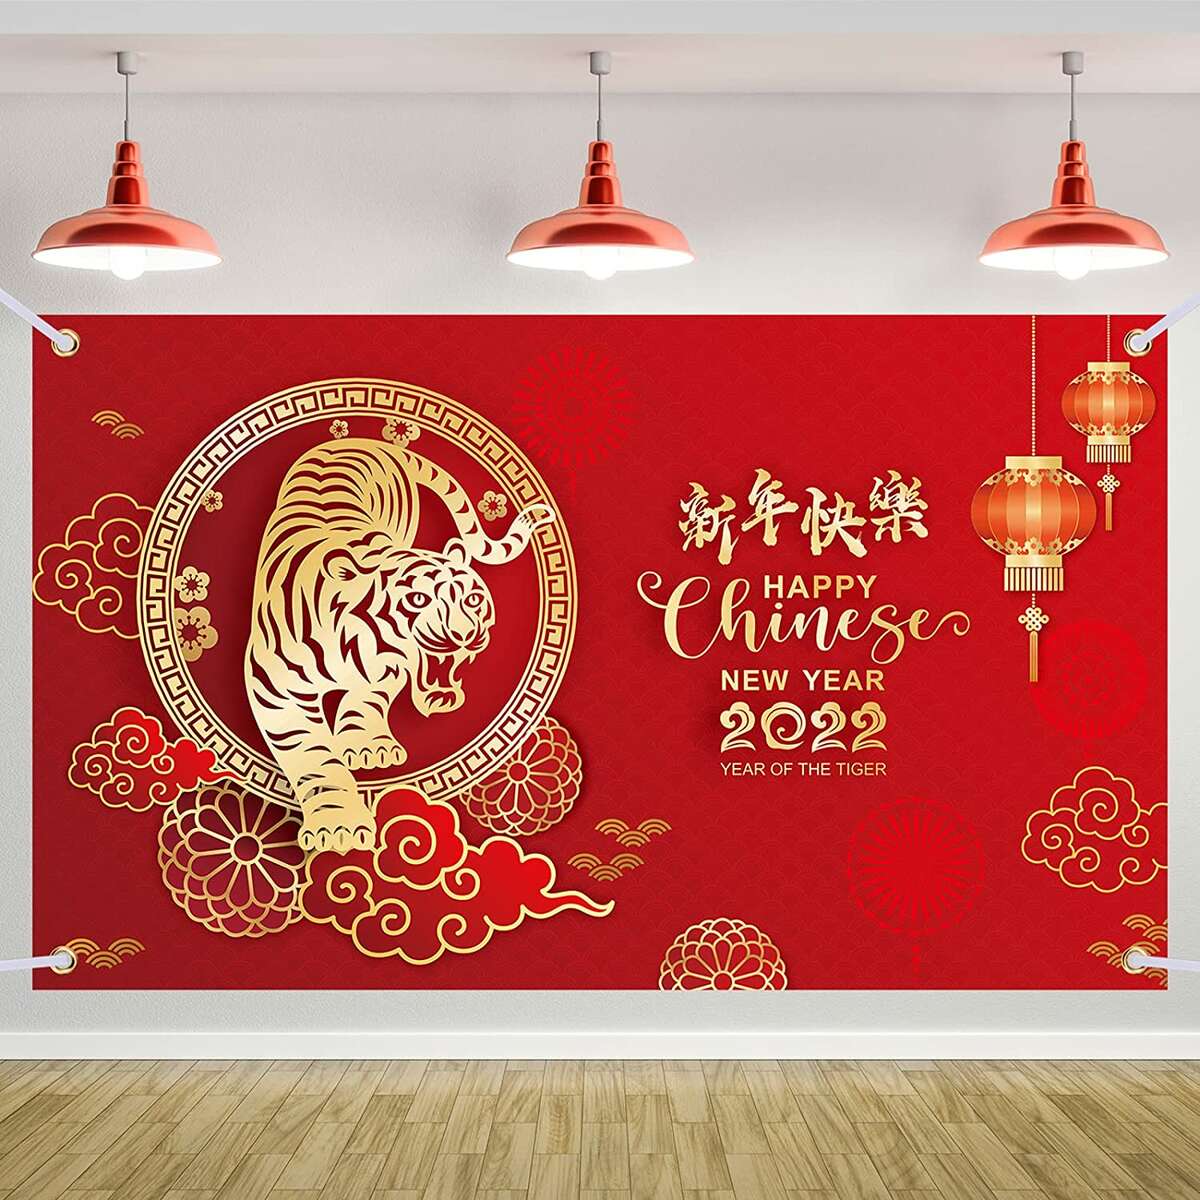 Lunar New Year 2022 Holiday In China